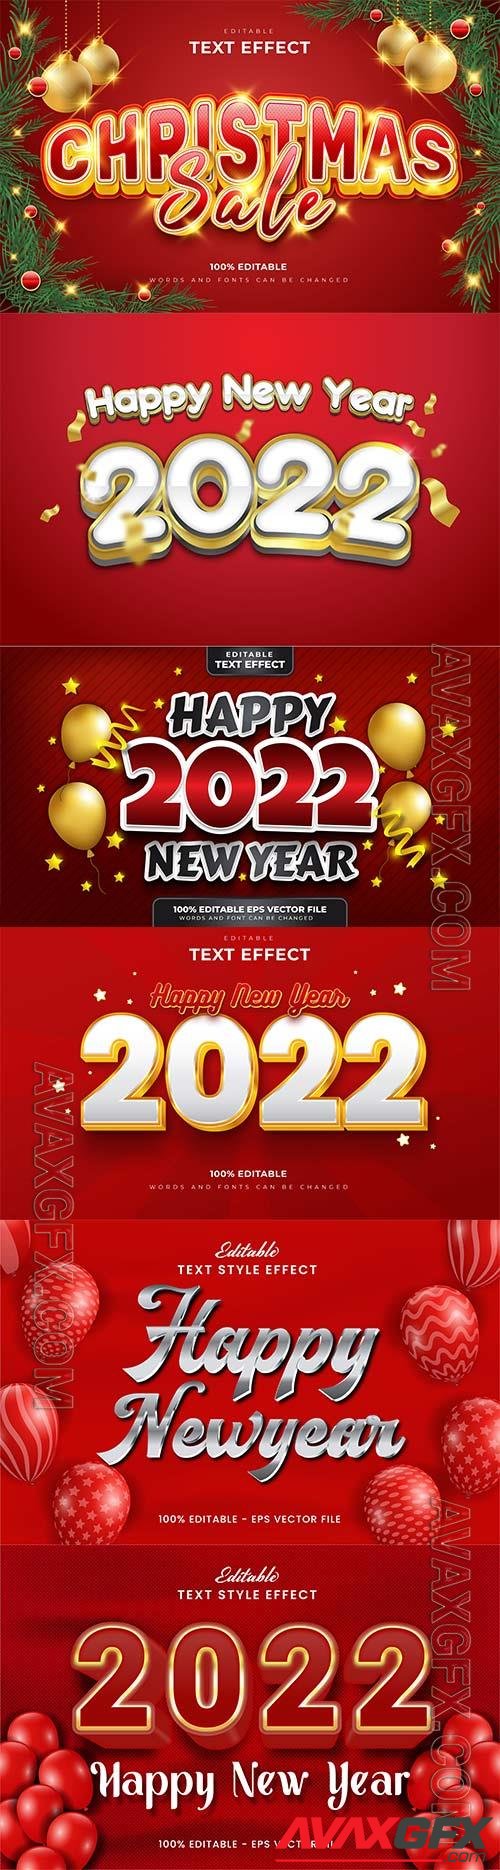 Merry christmas and happy new year 2022 editable vector text effects vol 12